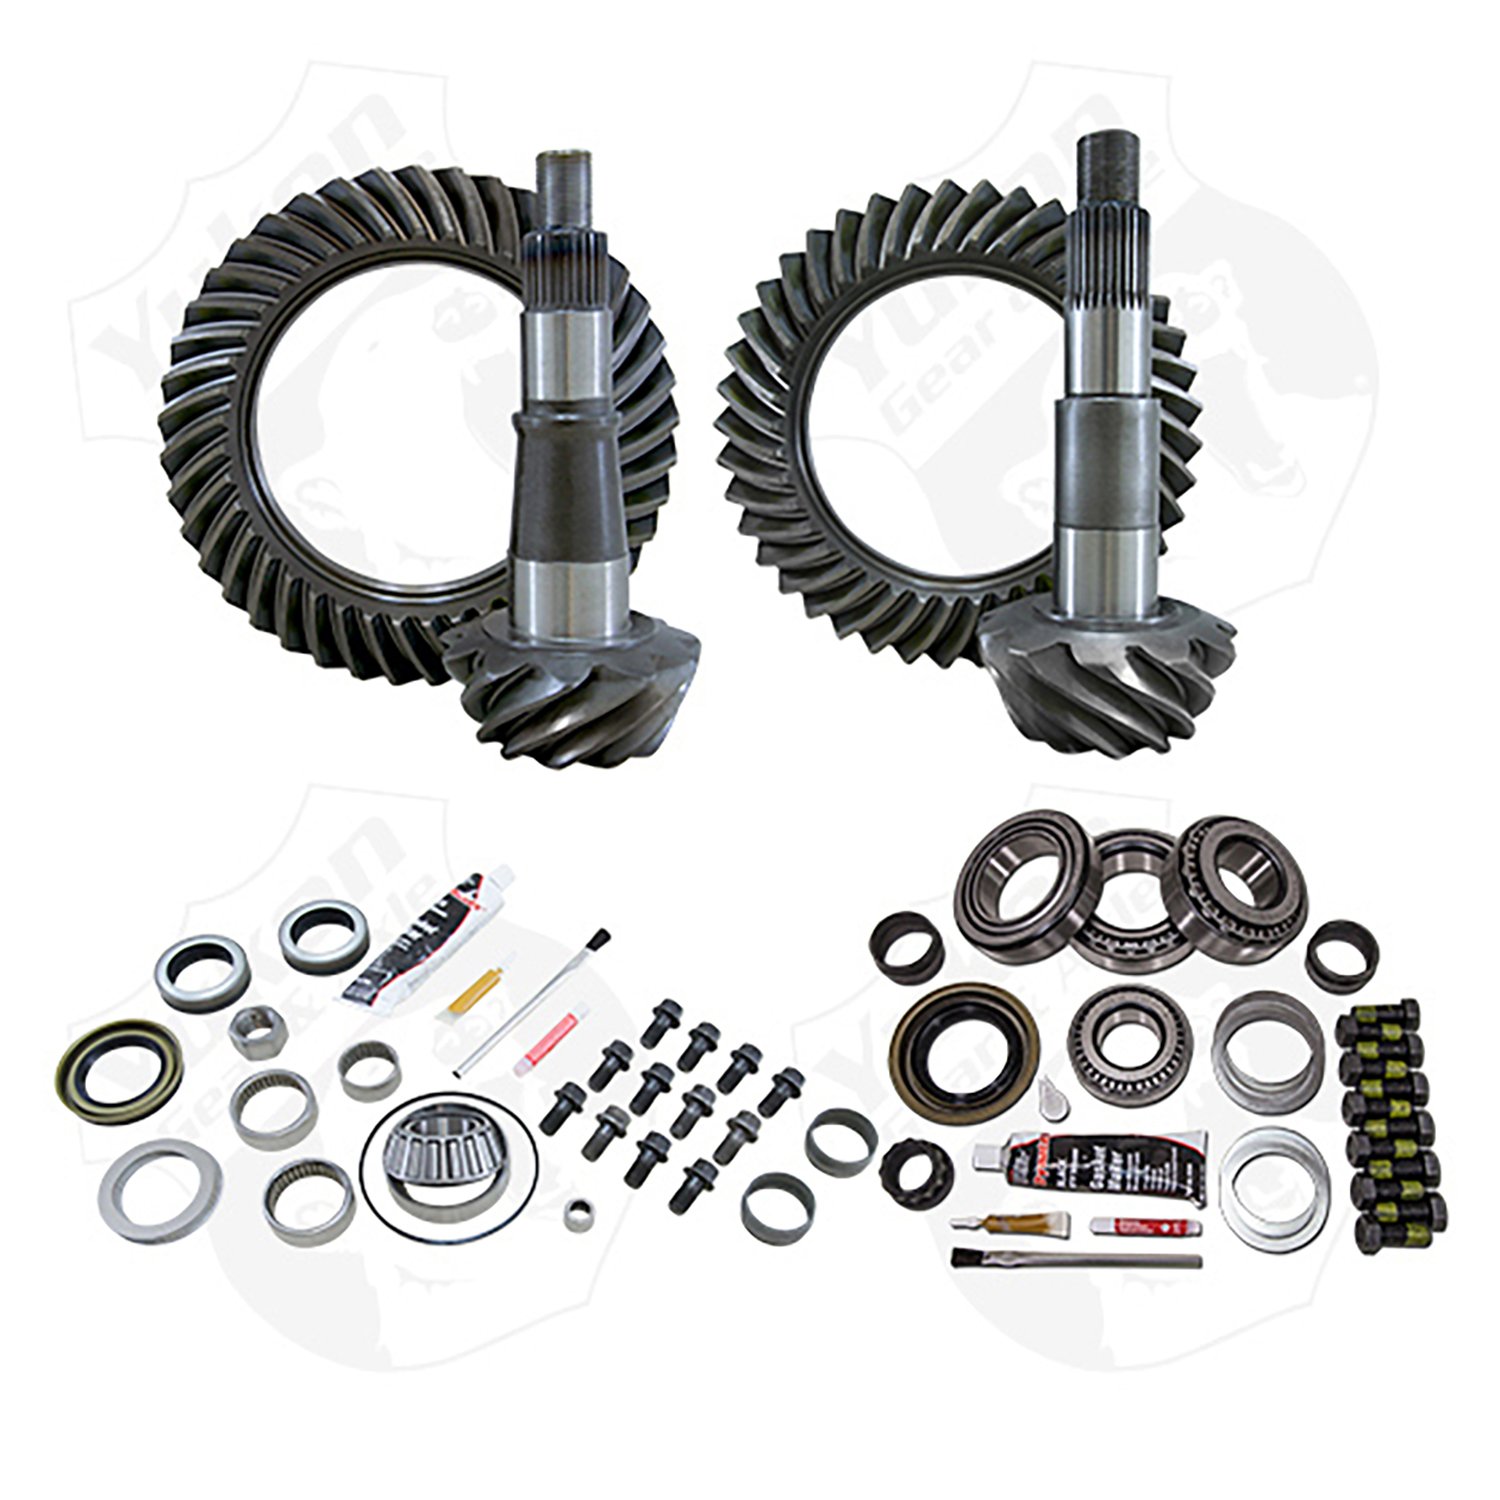 Gear & Install Kit Package For 2003-2011 Ram 2500 And 3500 3.73